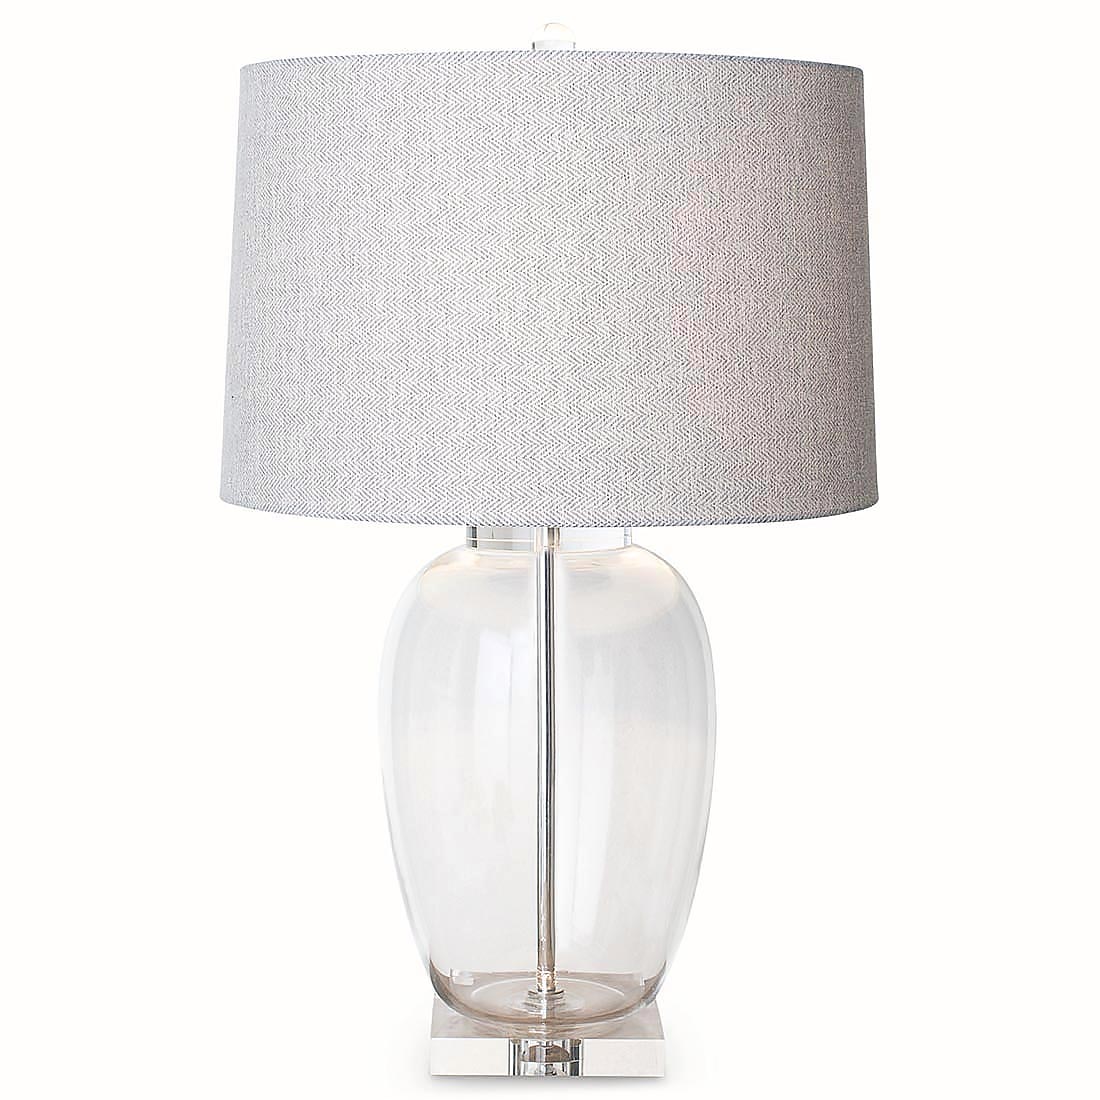 Oval Glass Table Lamp With Herringbone, Glass Light Shades For Table Lamps